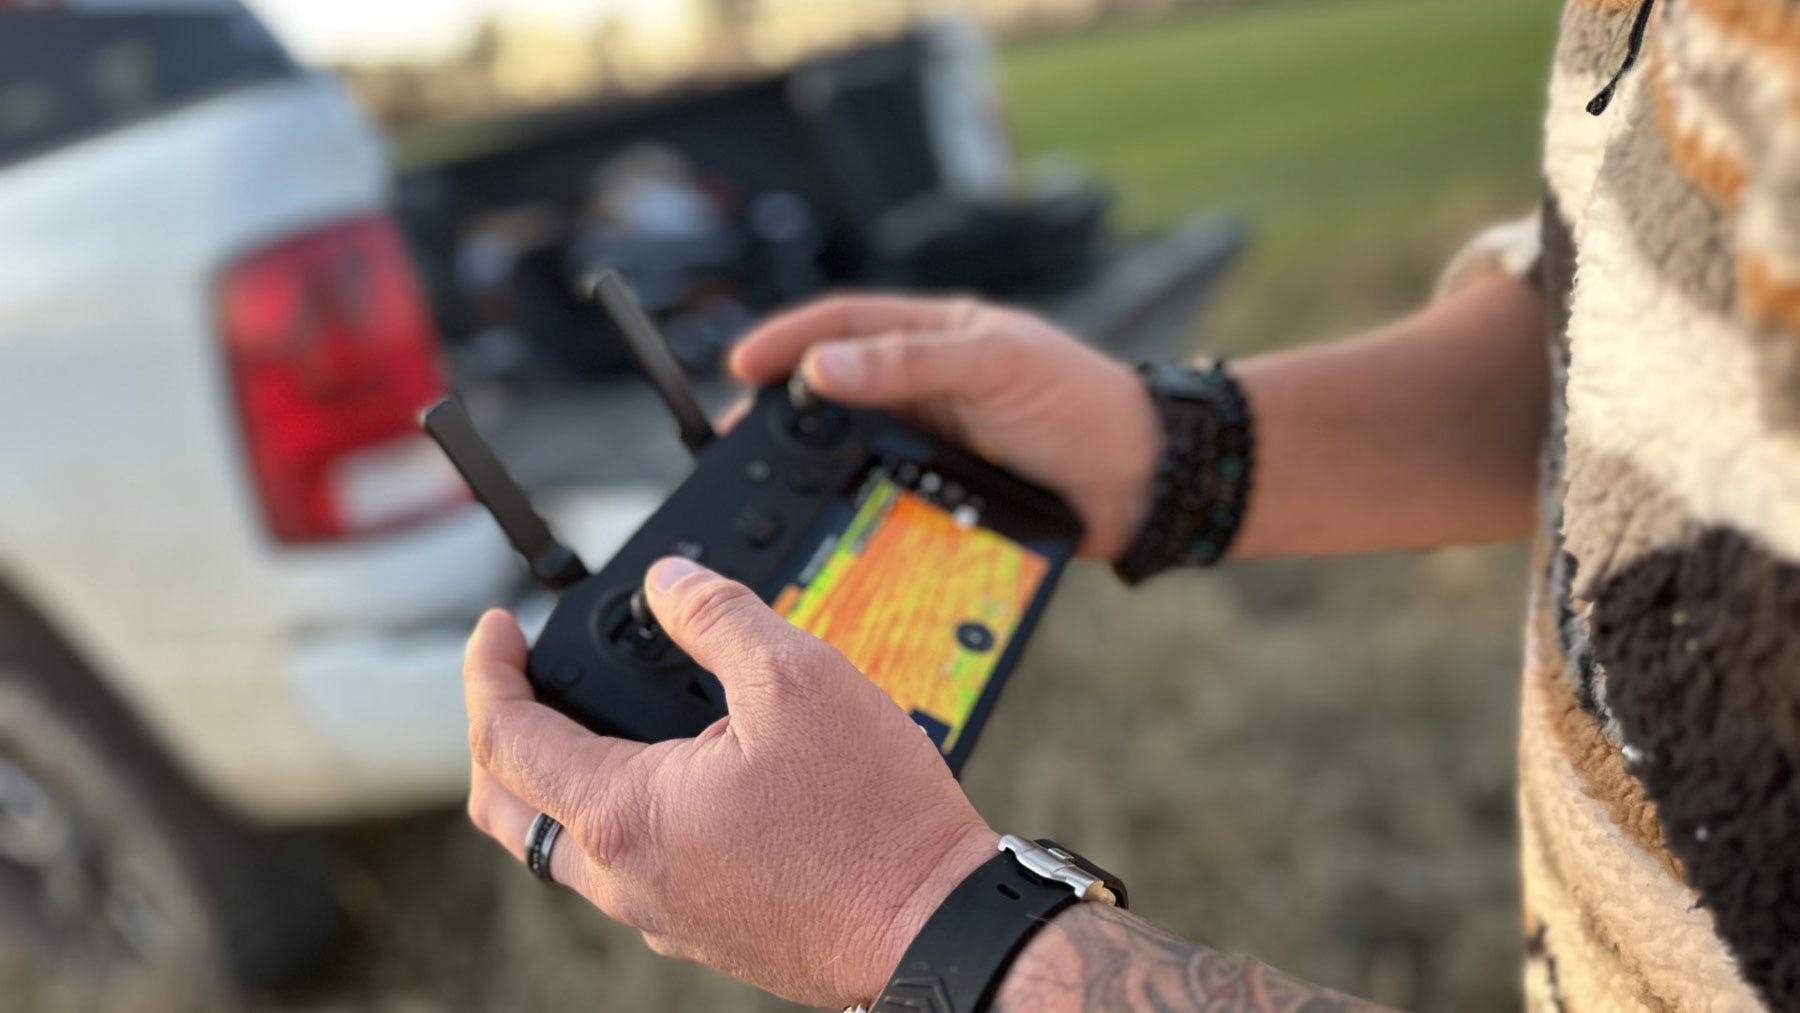 Close up of person holding DJI Mavic Multispectral Drone control, with image of field on screen of control.